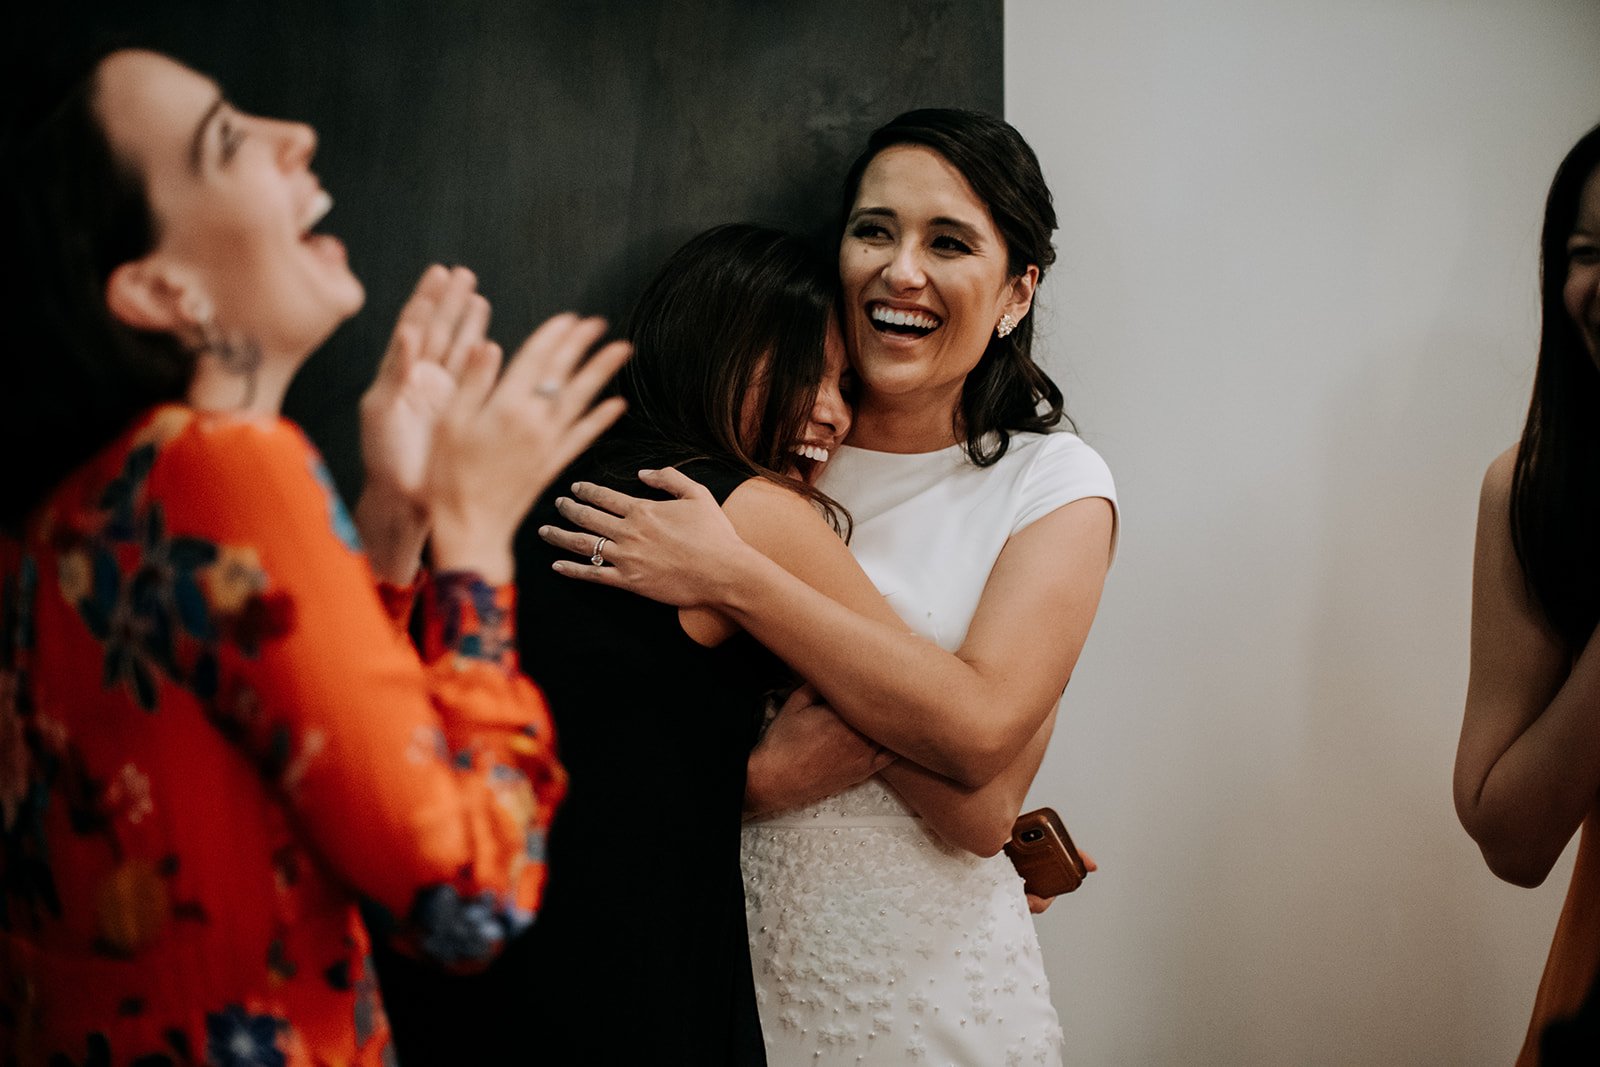  woman laughing and clapping with another woman hugging bride  